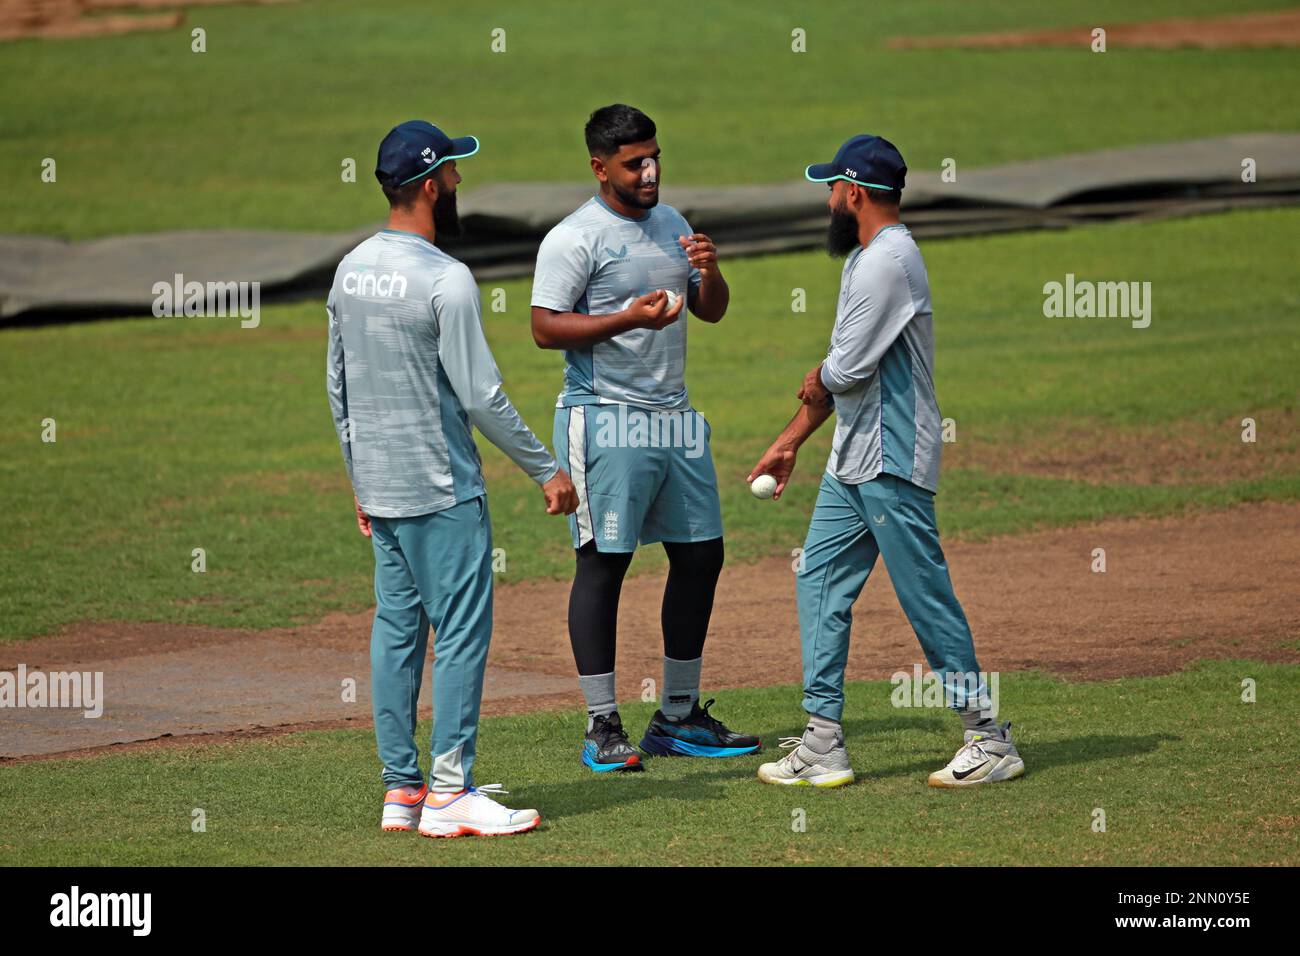 England One Day International Cricket Team attends practice at BCB Academy Ground in Mirpur, Dhaka, Bangladesh. The Jos Buttler-led side arrived in th Stock Photo